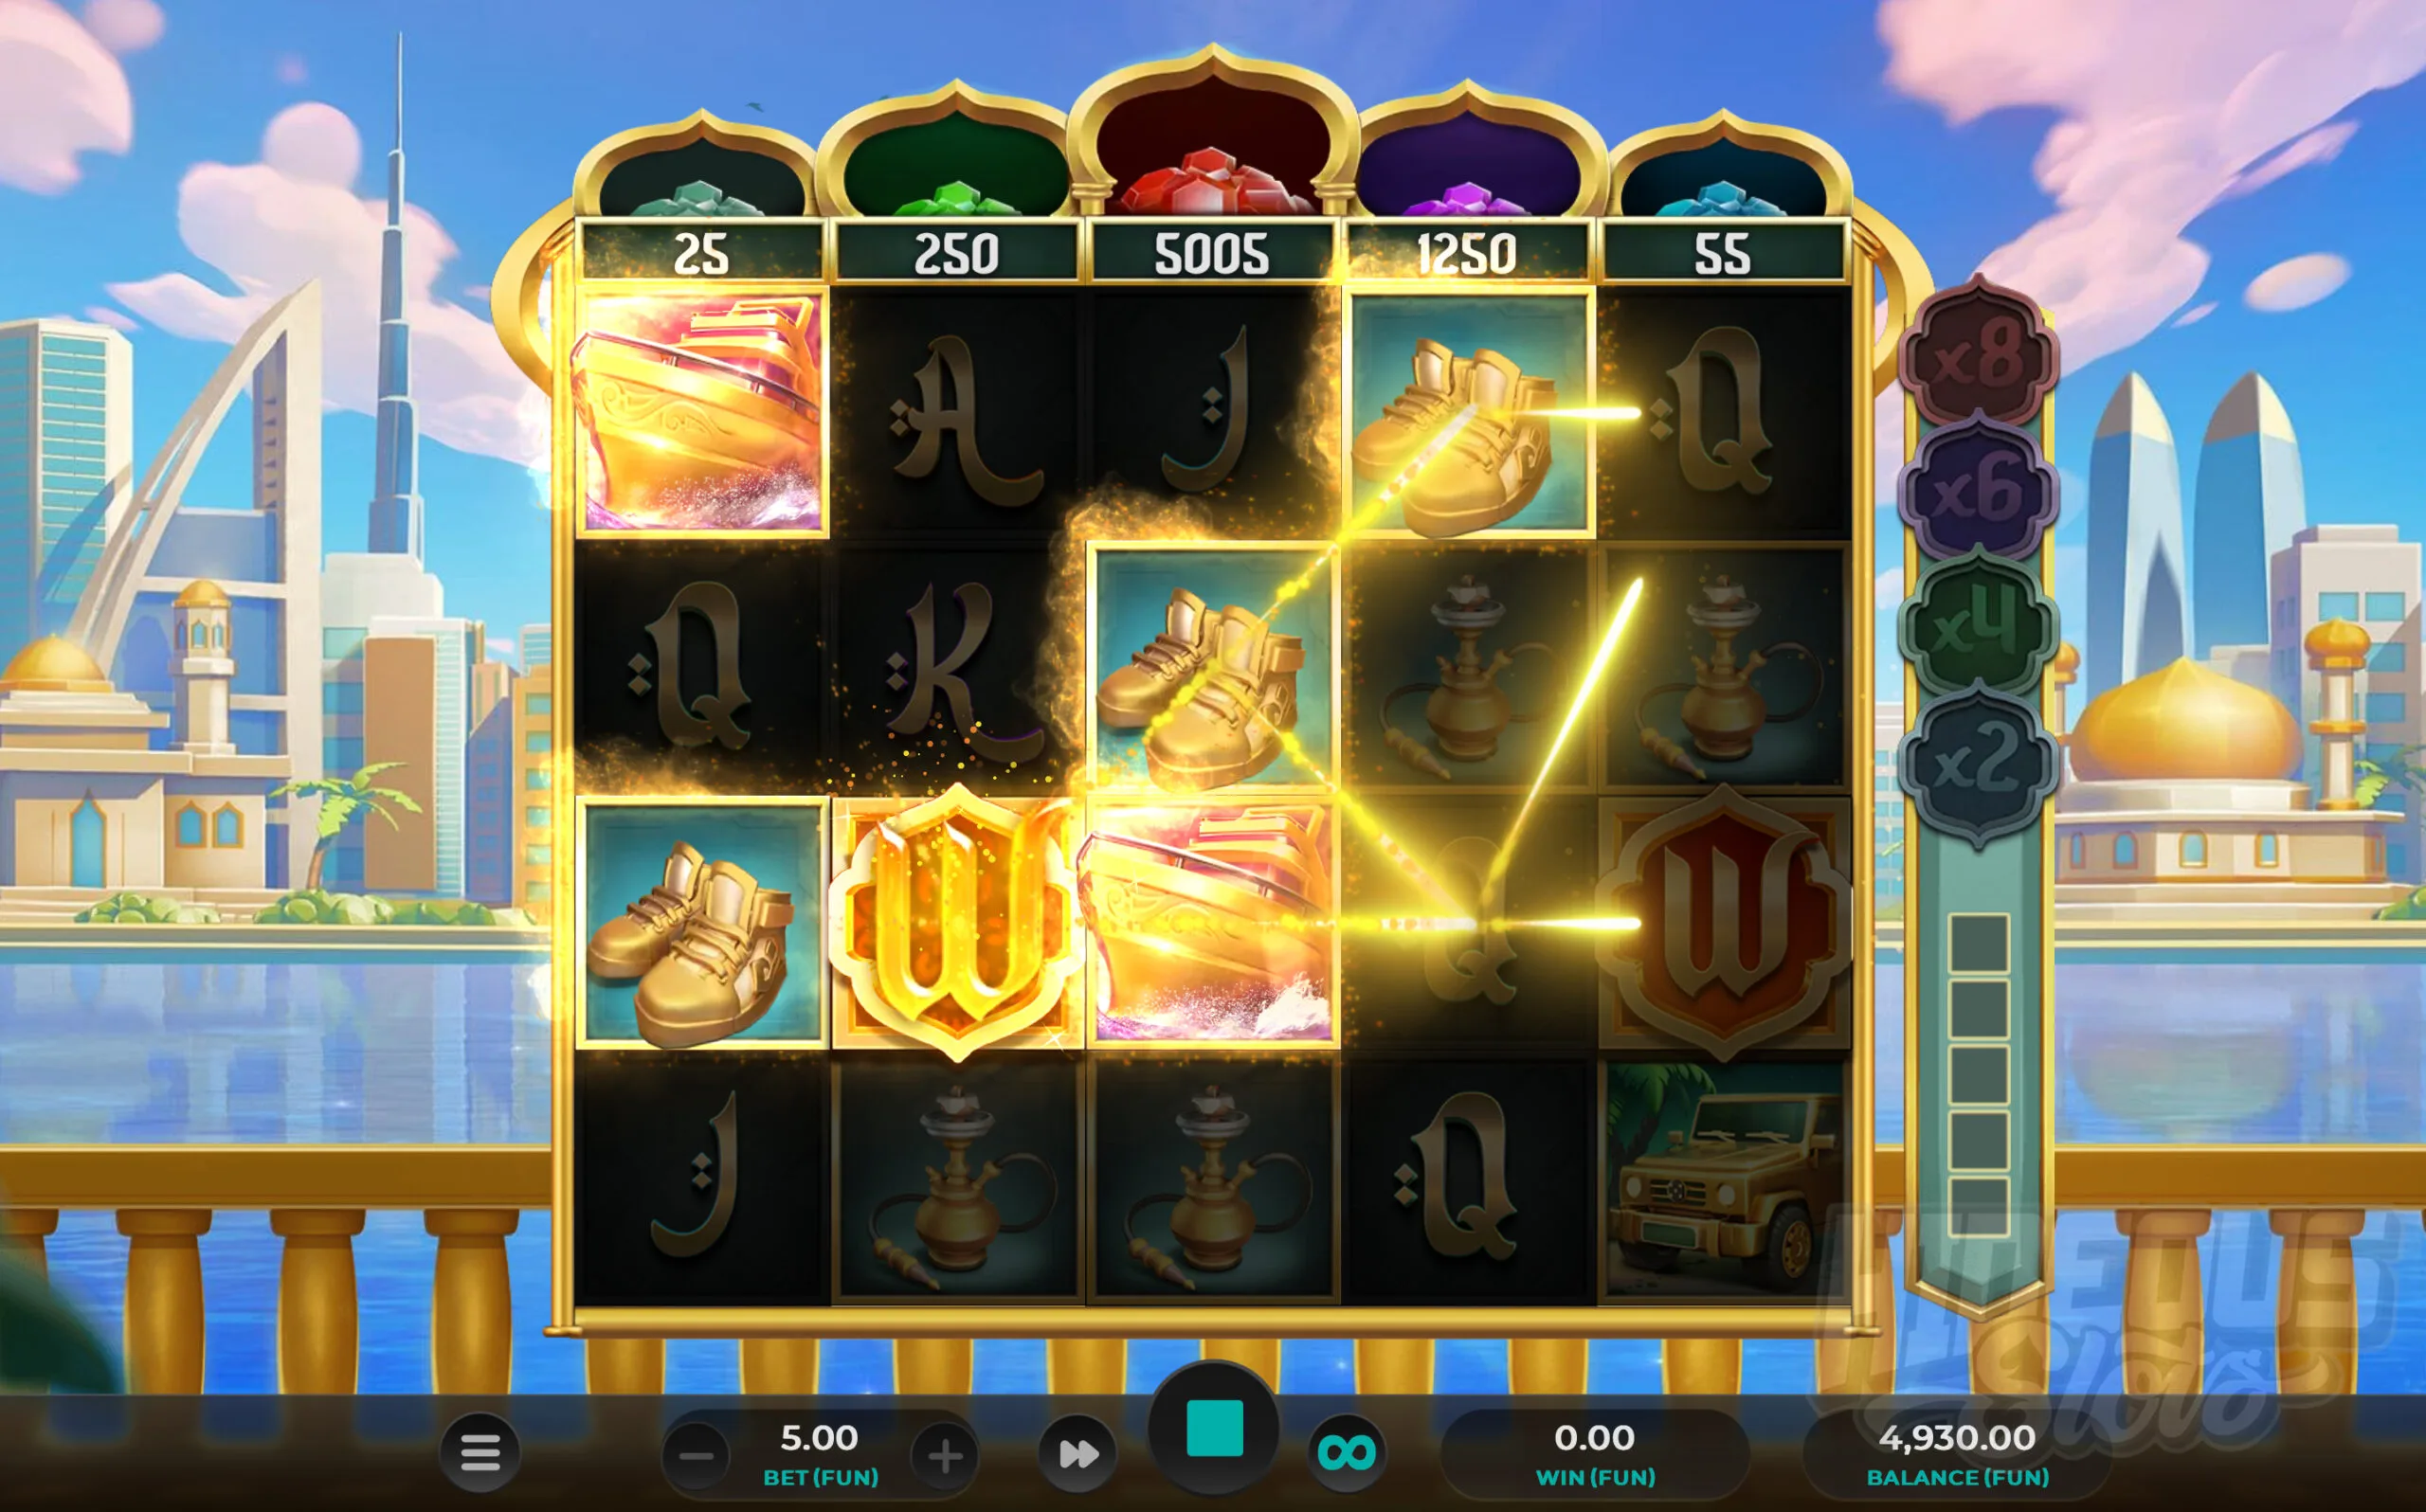 Sultan Spins Offers Players 40 Fixed Win Lines